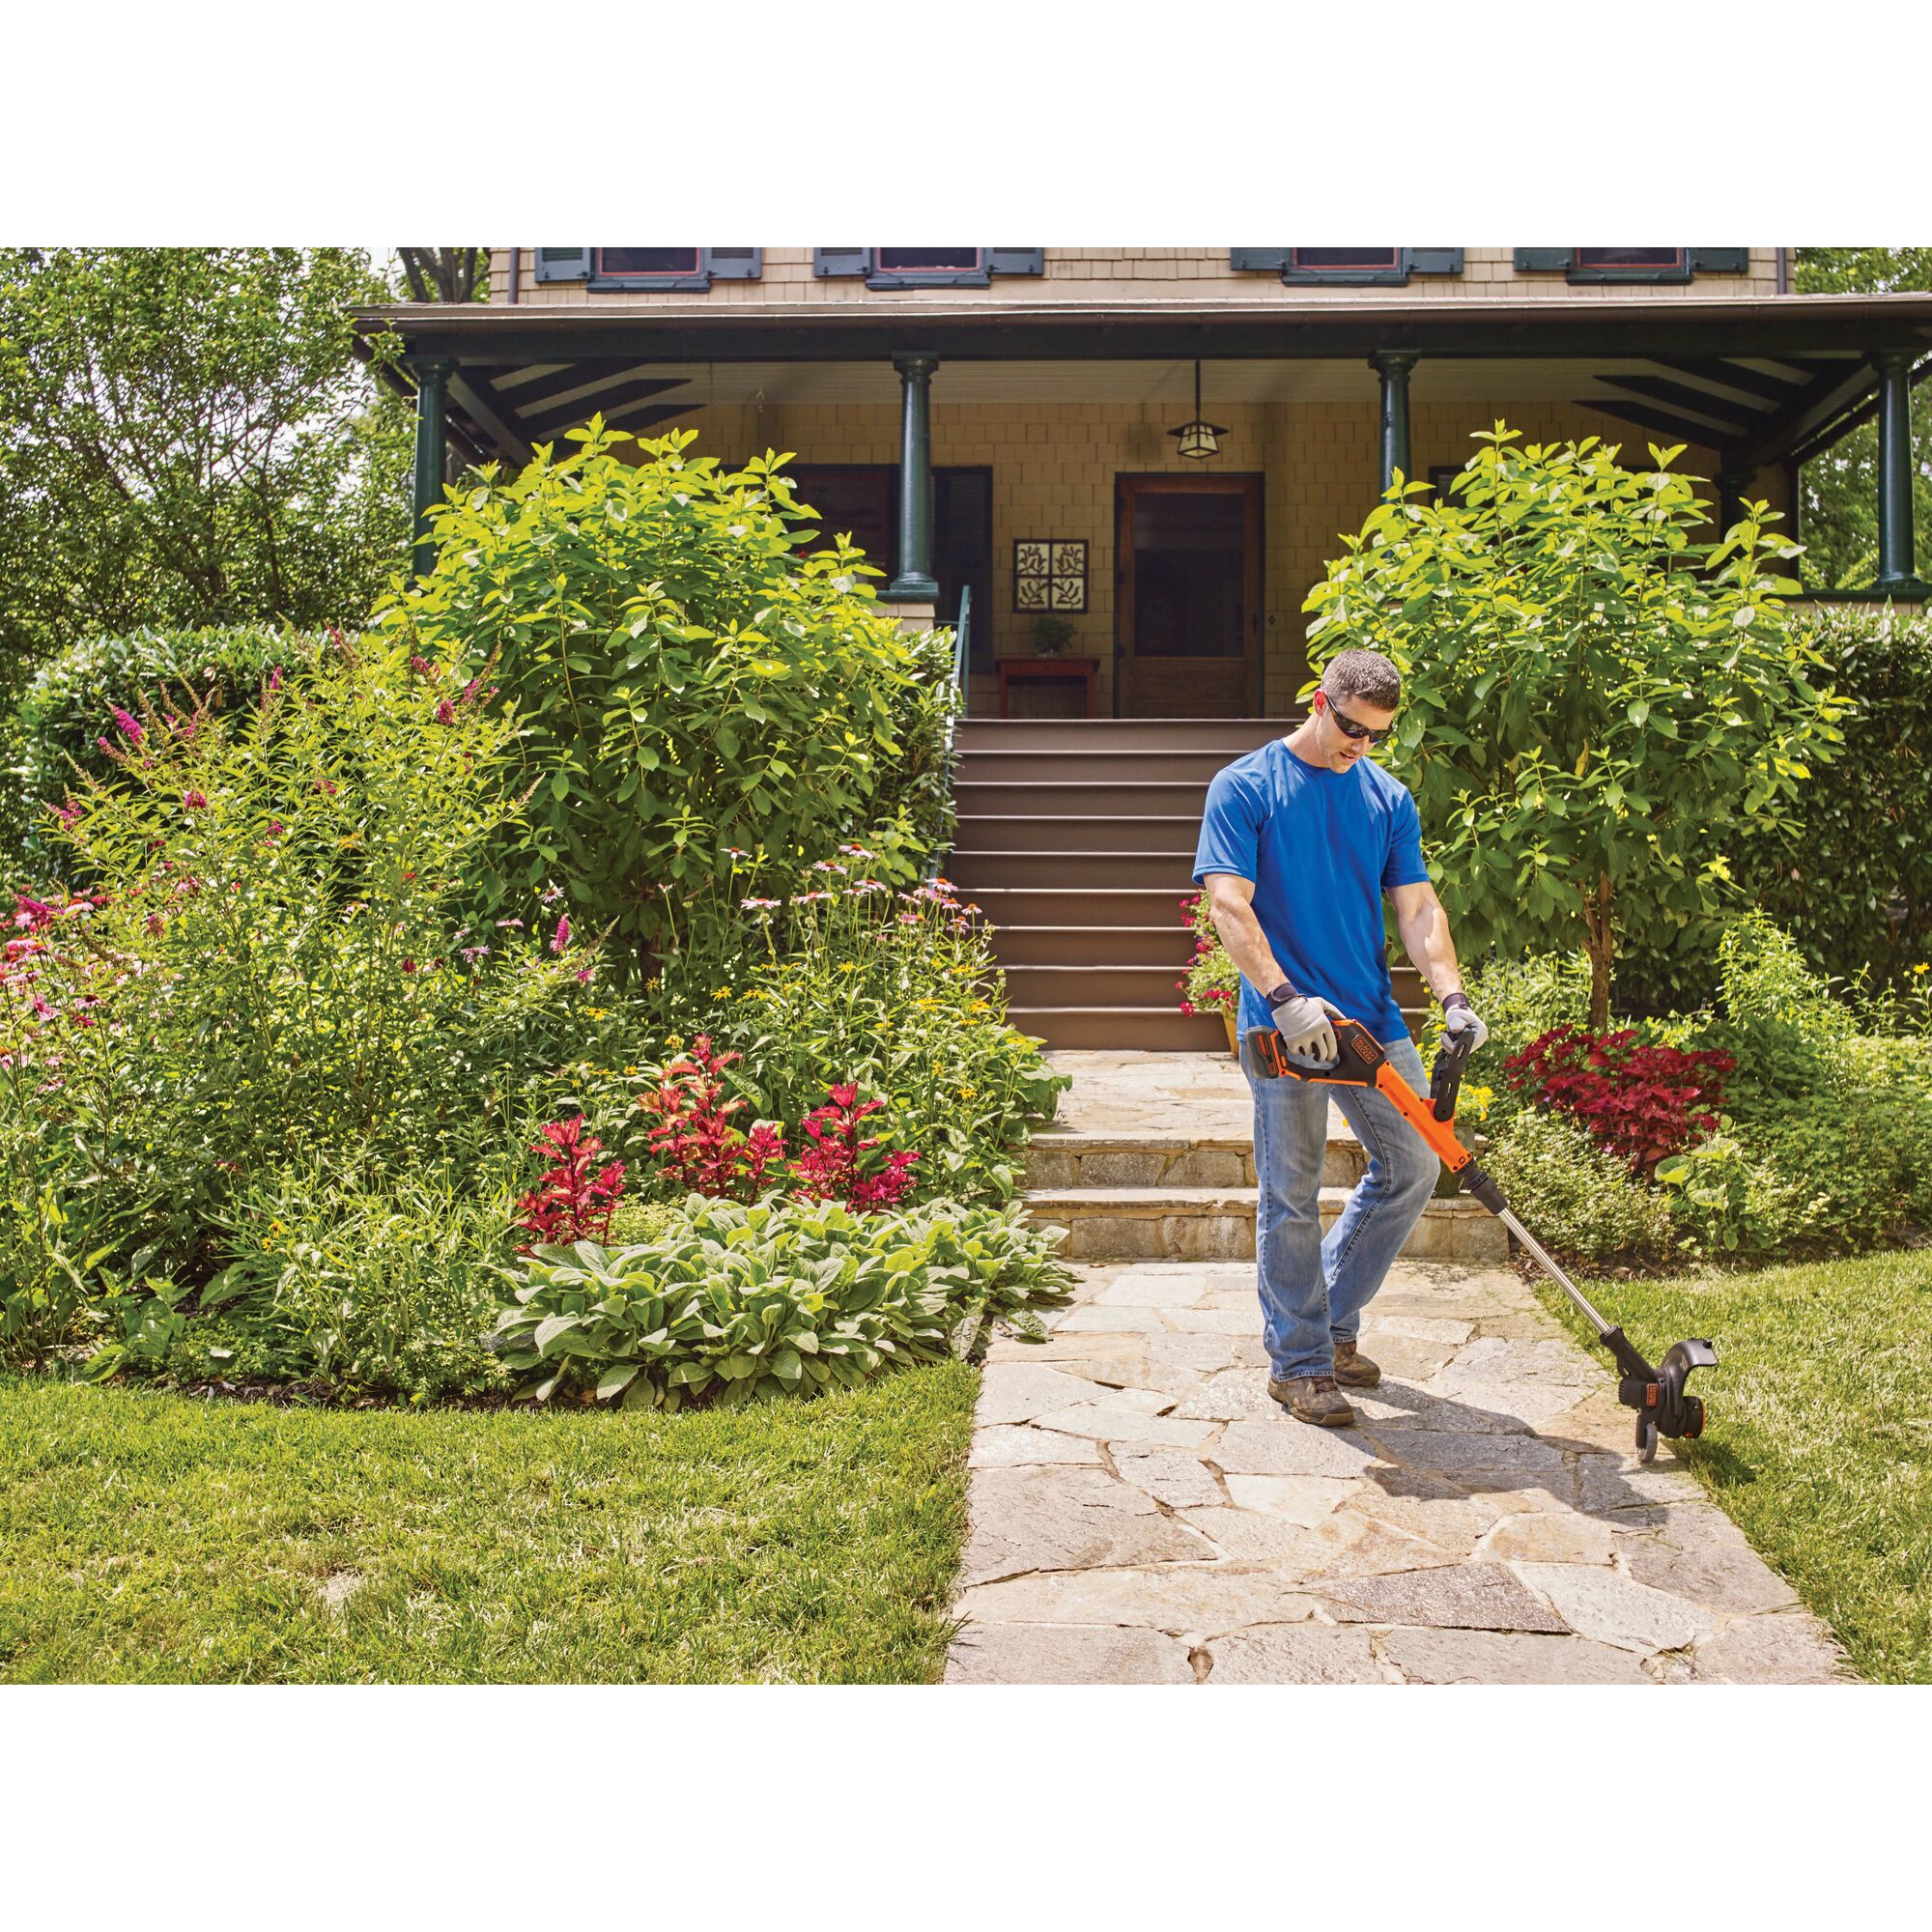 Man using 20V Max Lithium Easyfeed string Trimmer/Edger along walkway to the front door of a house.